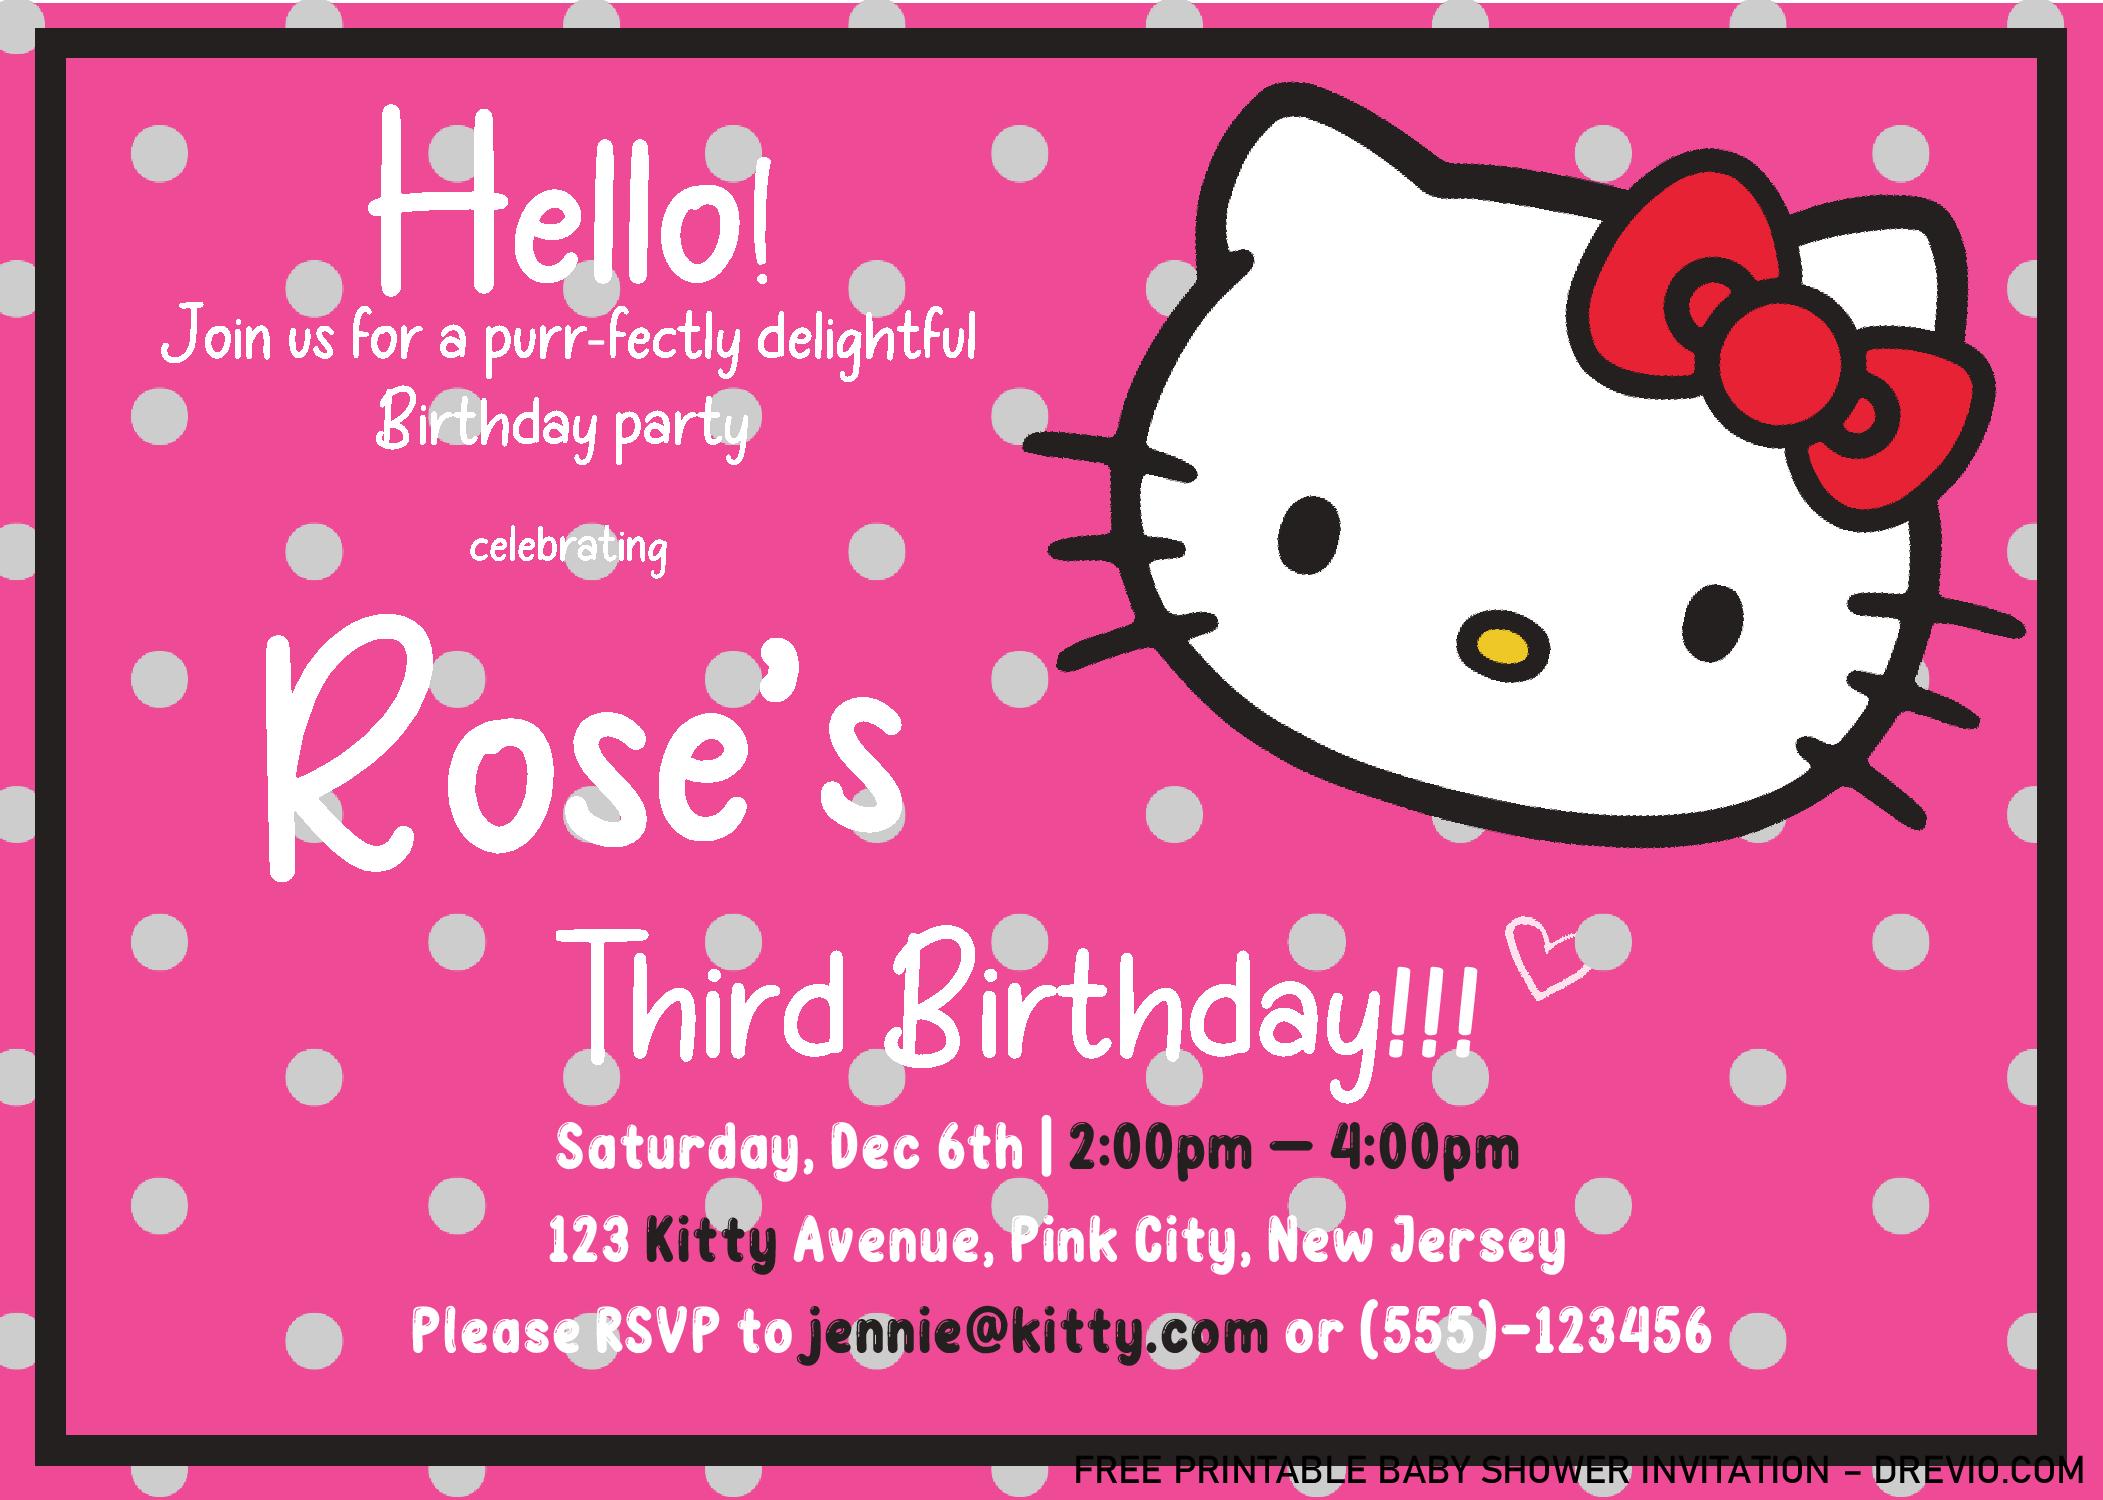 hello-kitty-invitation-card-template-free-invitations-resume-template-collections-p3pw0g4zdn